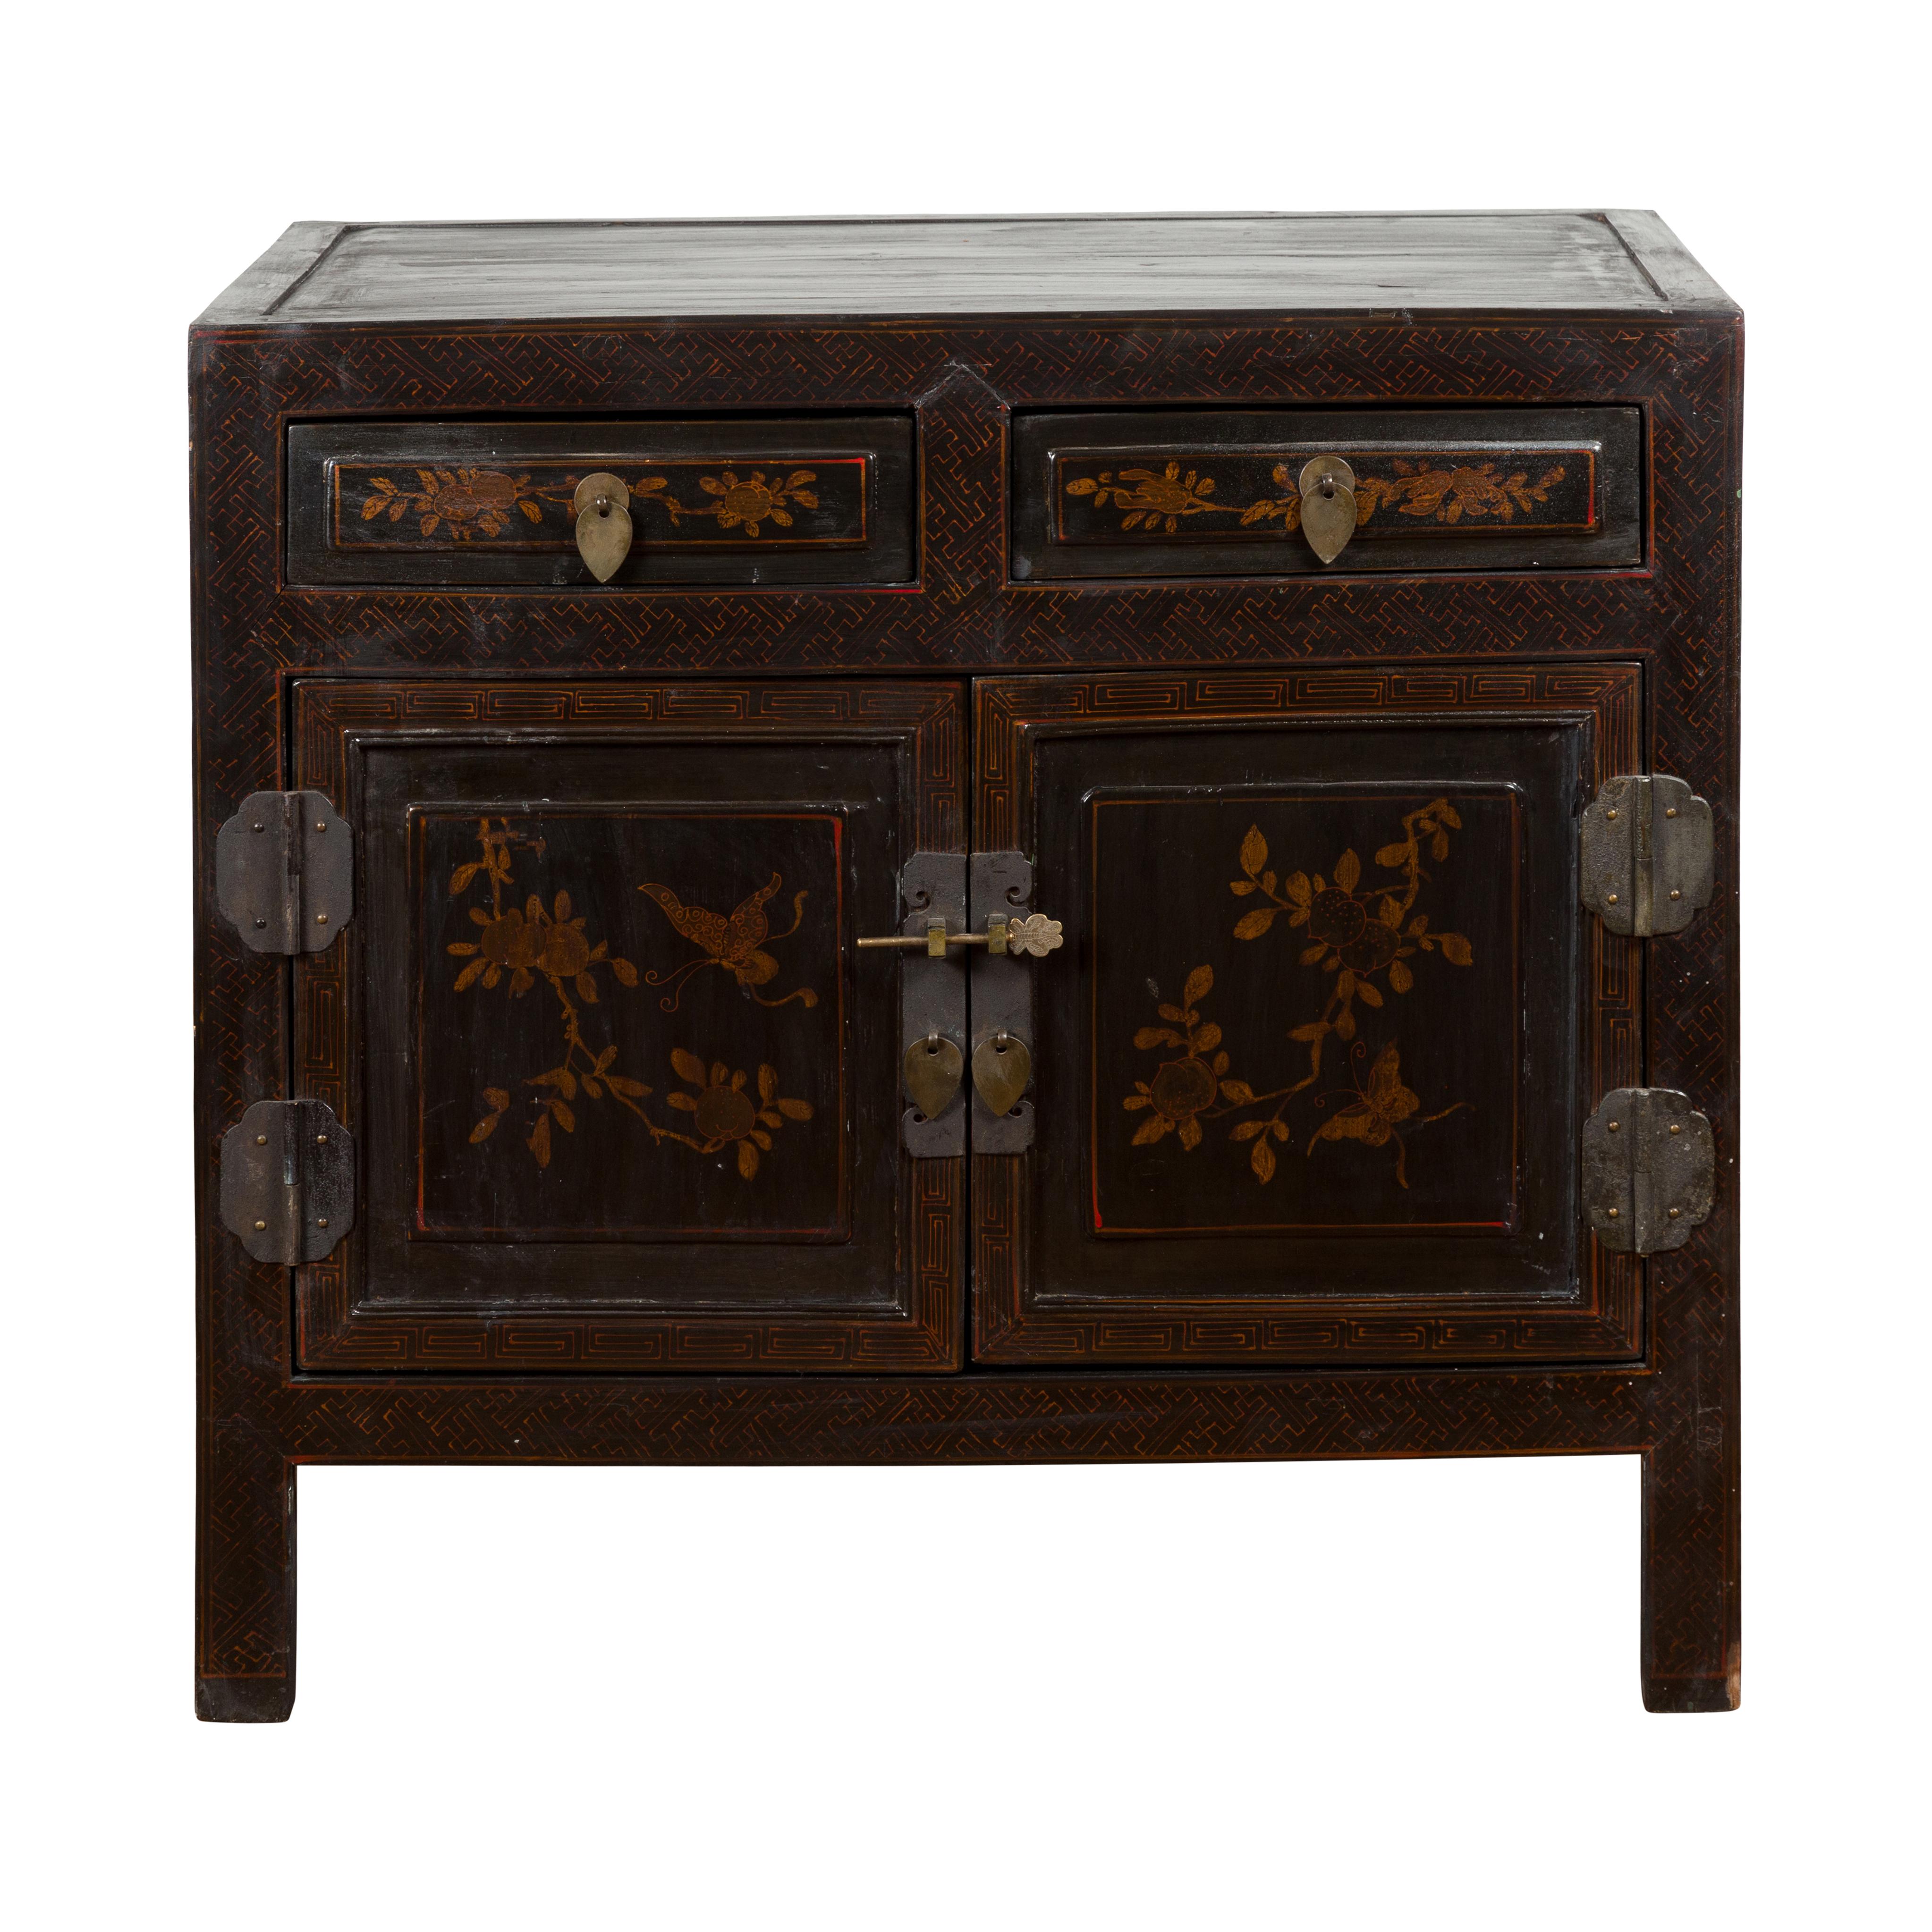 A Chinese late Qing Dynasty period dark brown lacquered cabinet from the early 20th century with floral motifs, patinated brass hardware and etched butterfly key. Discover the captivating beauty of this antique Chinese dark brown lacquered cabinet